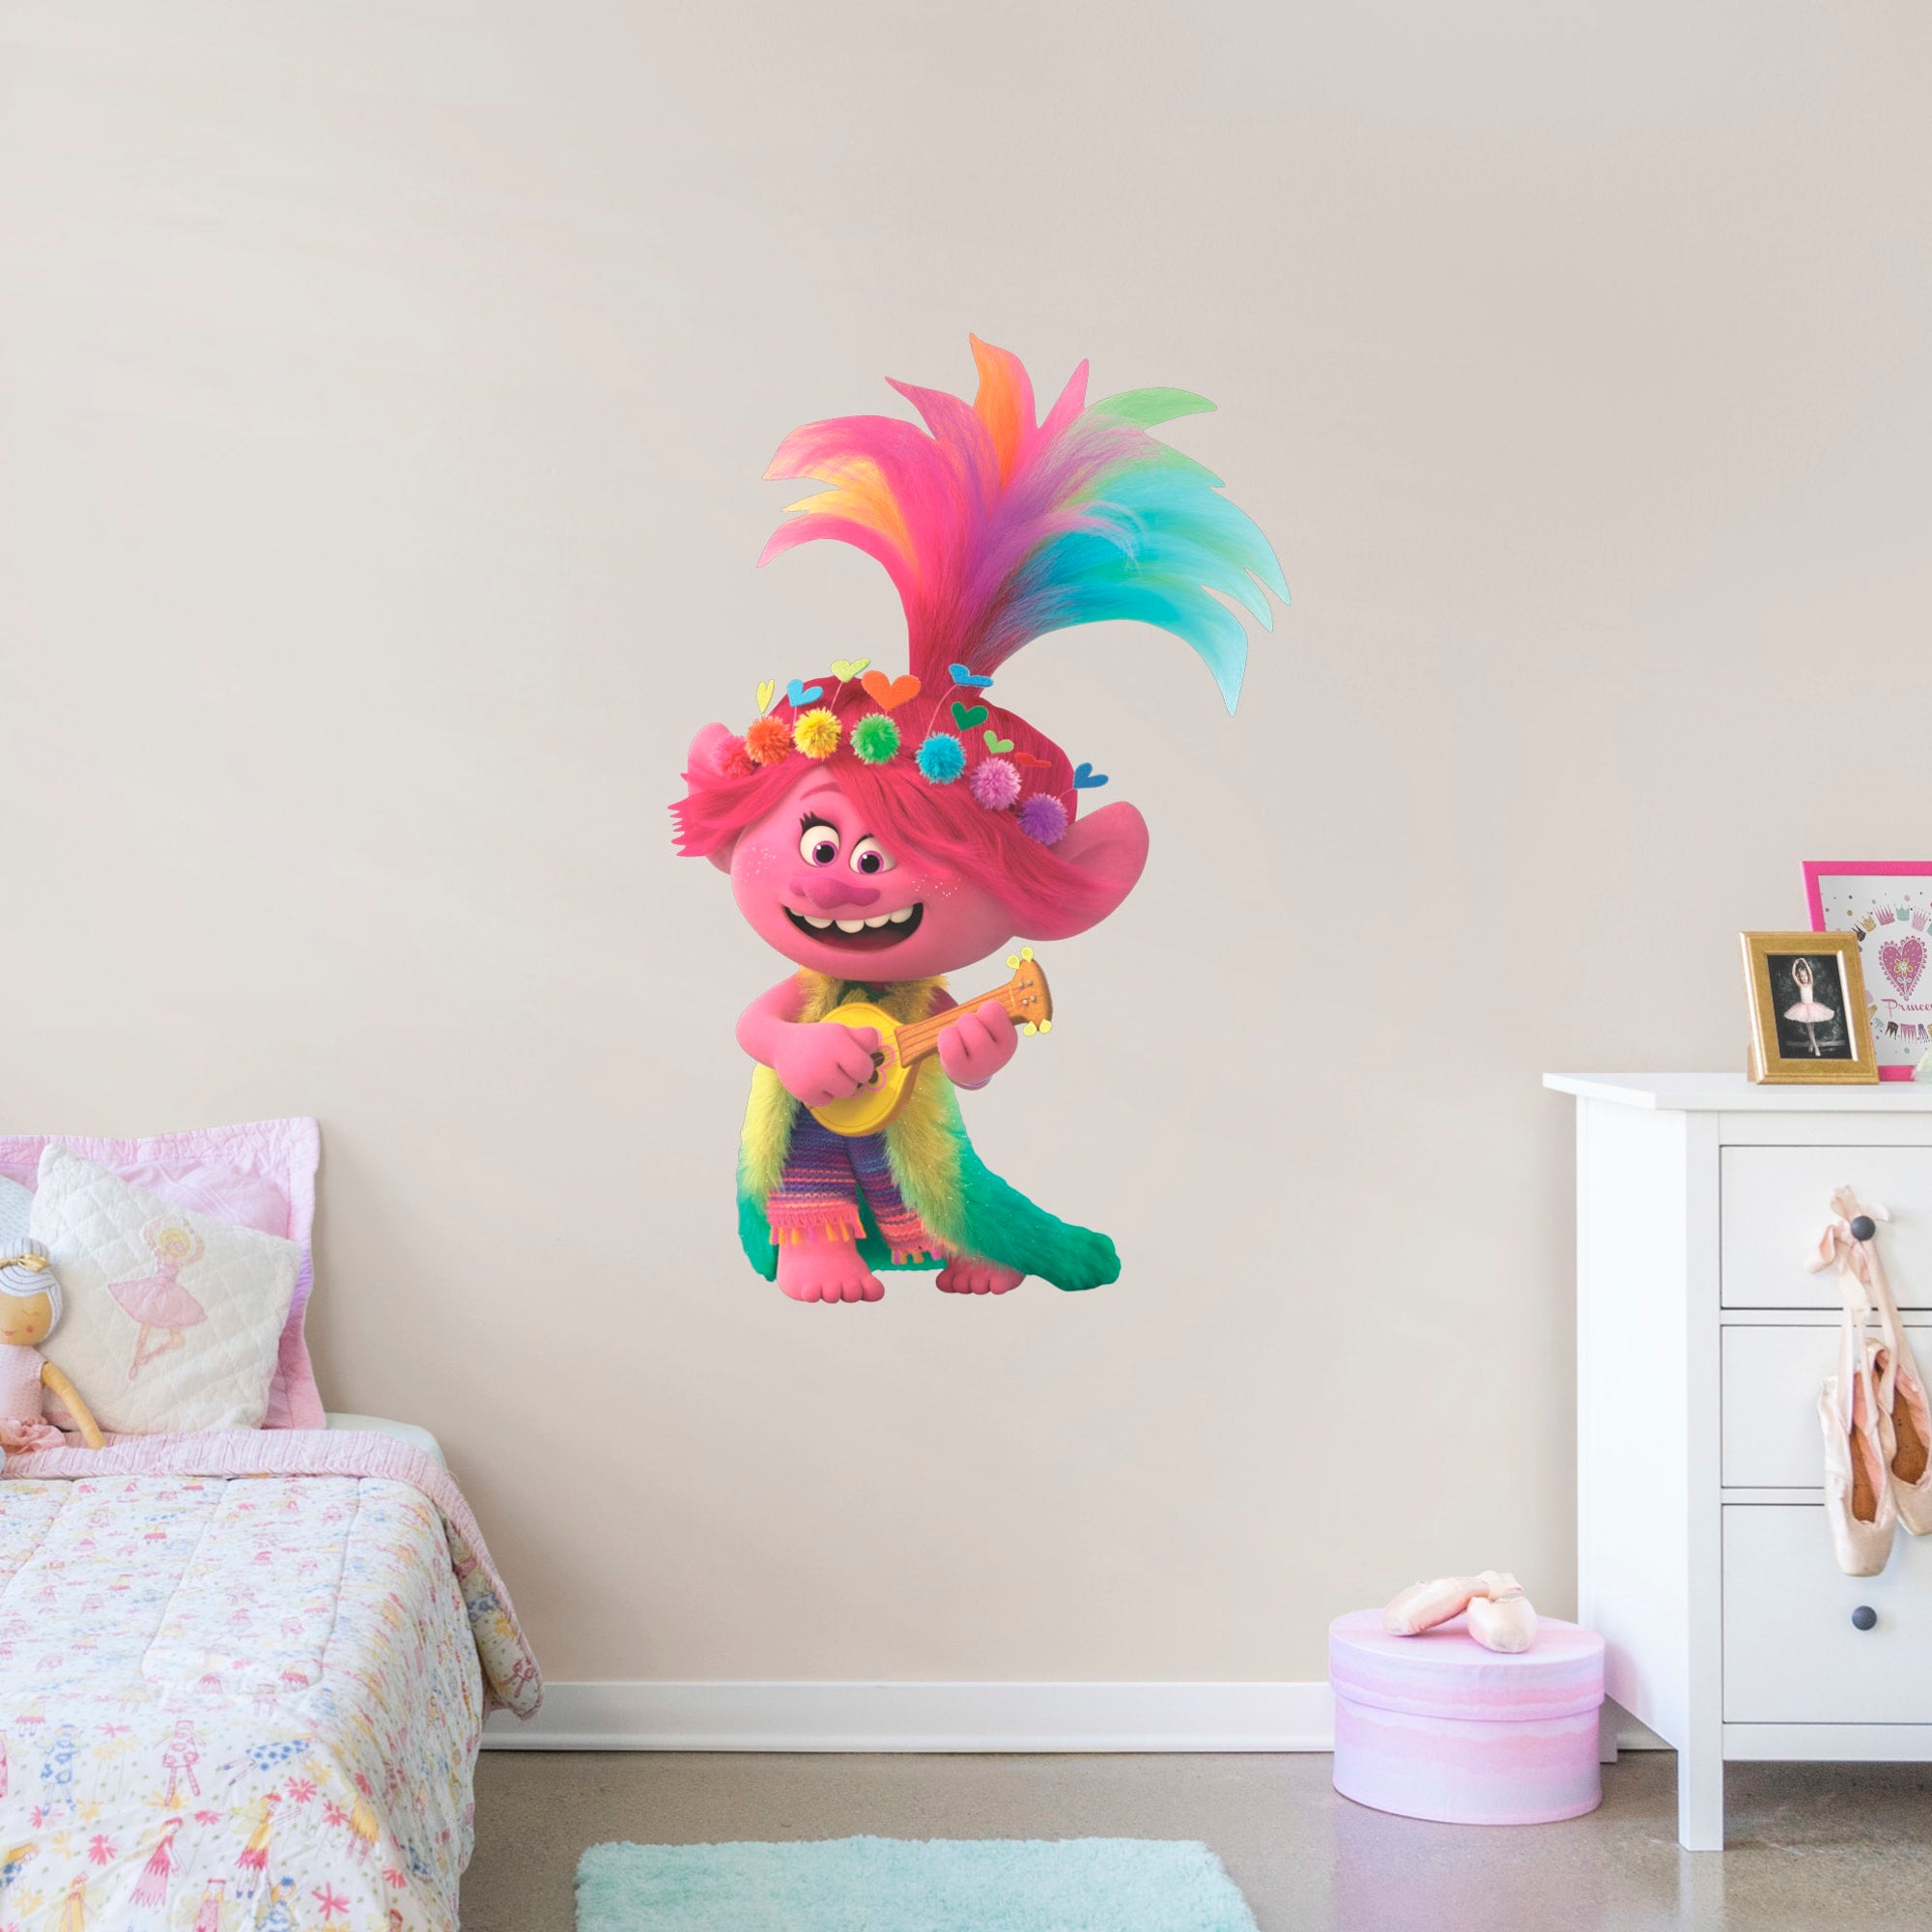 Queen Poppy: Trolls World Tour - Officially Licensed Removable Wall Decal Giant Character + 2 Decals (33"W x 51"H) by Fathead |